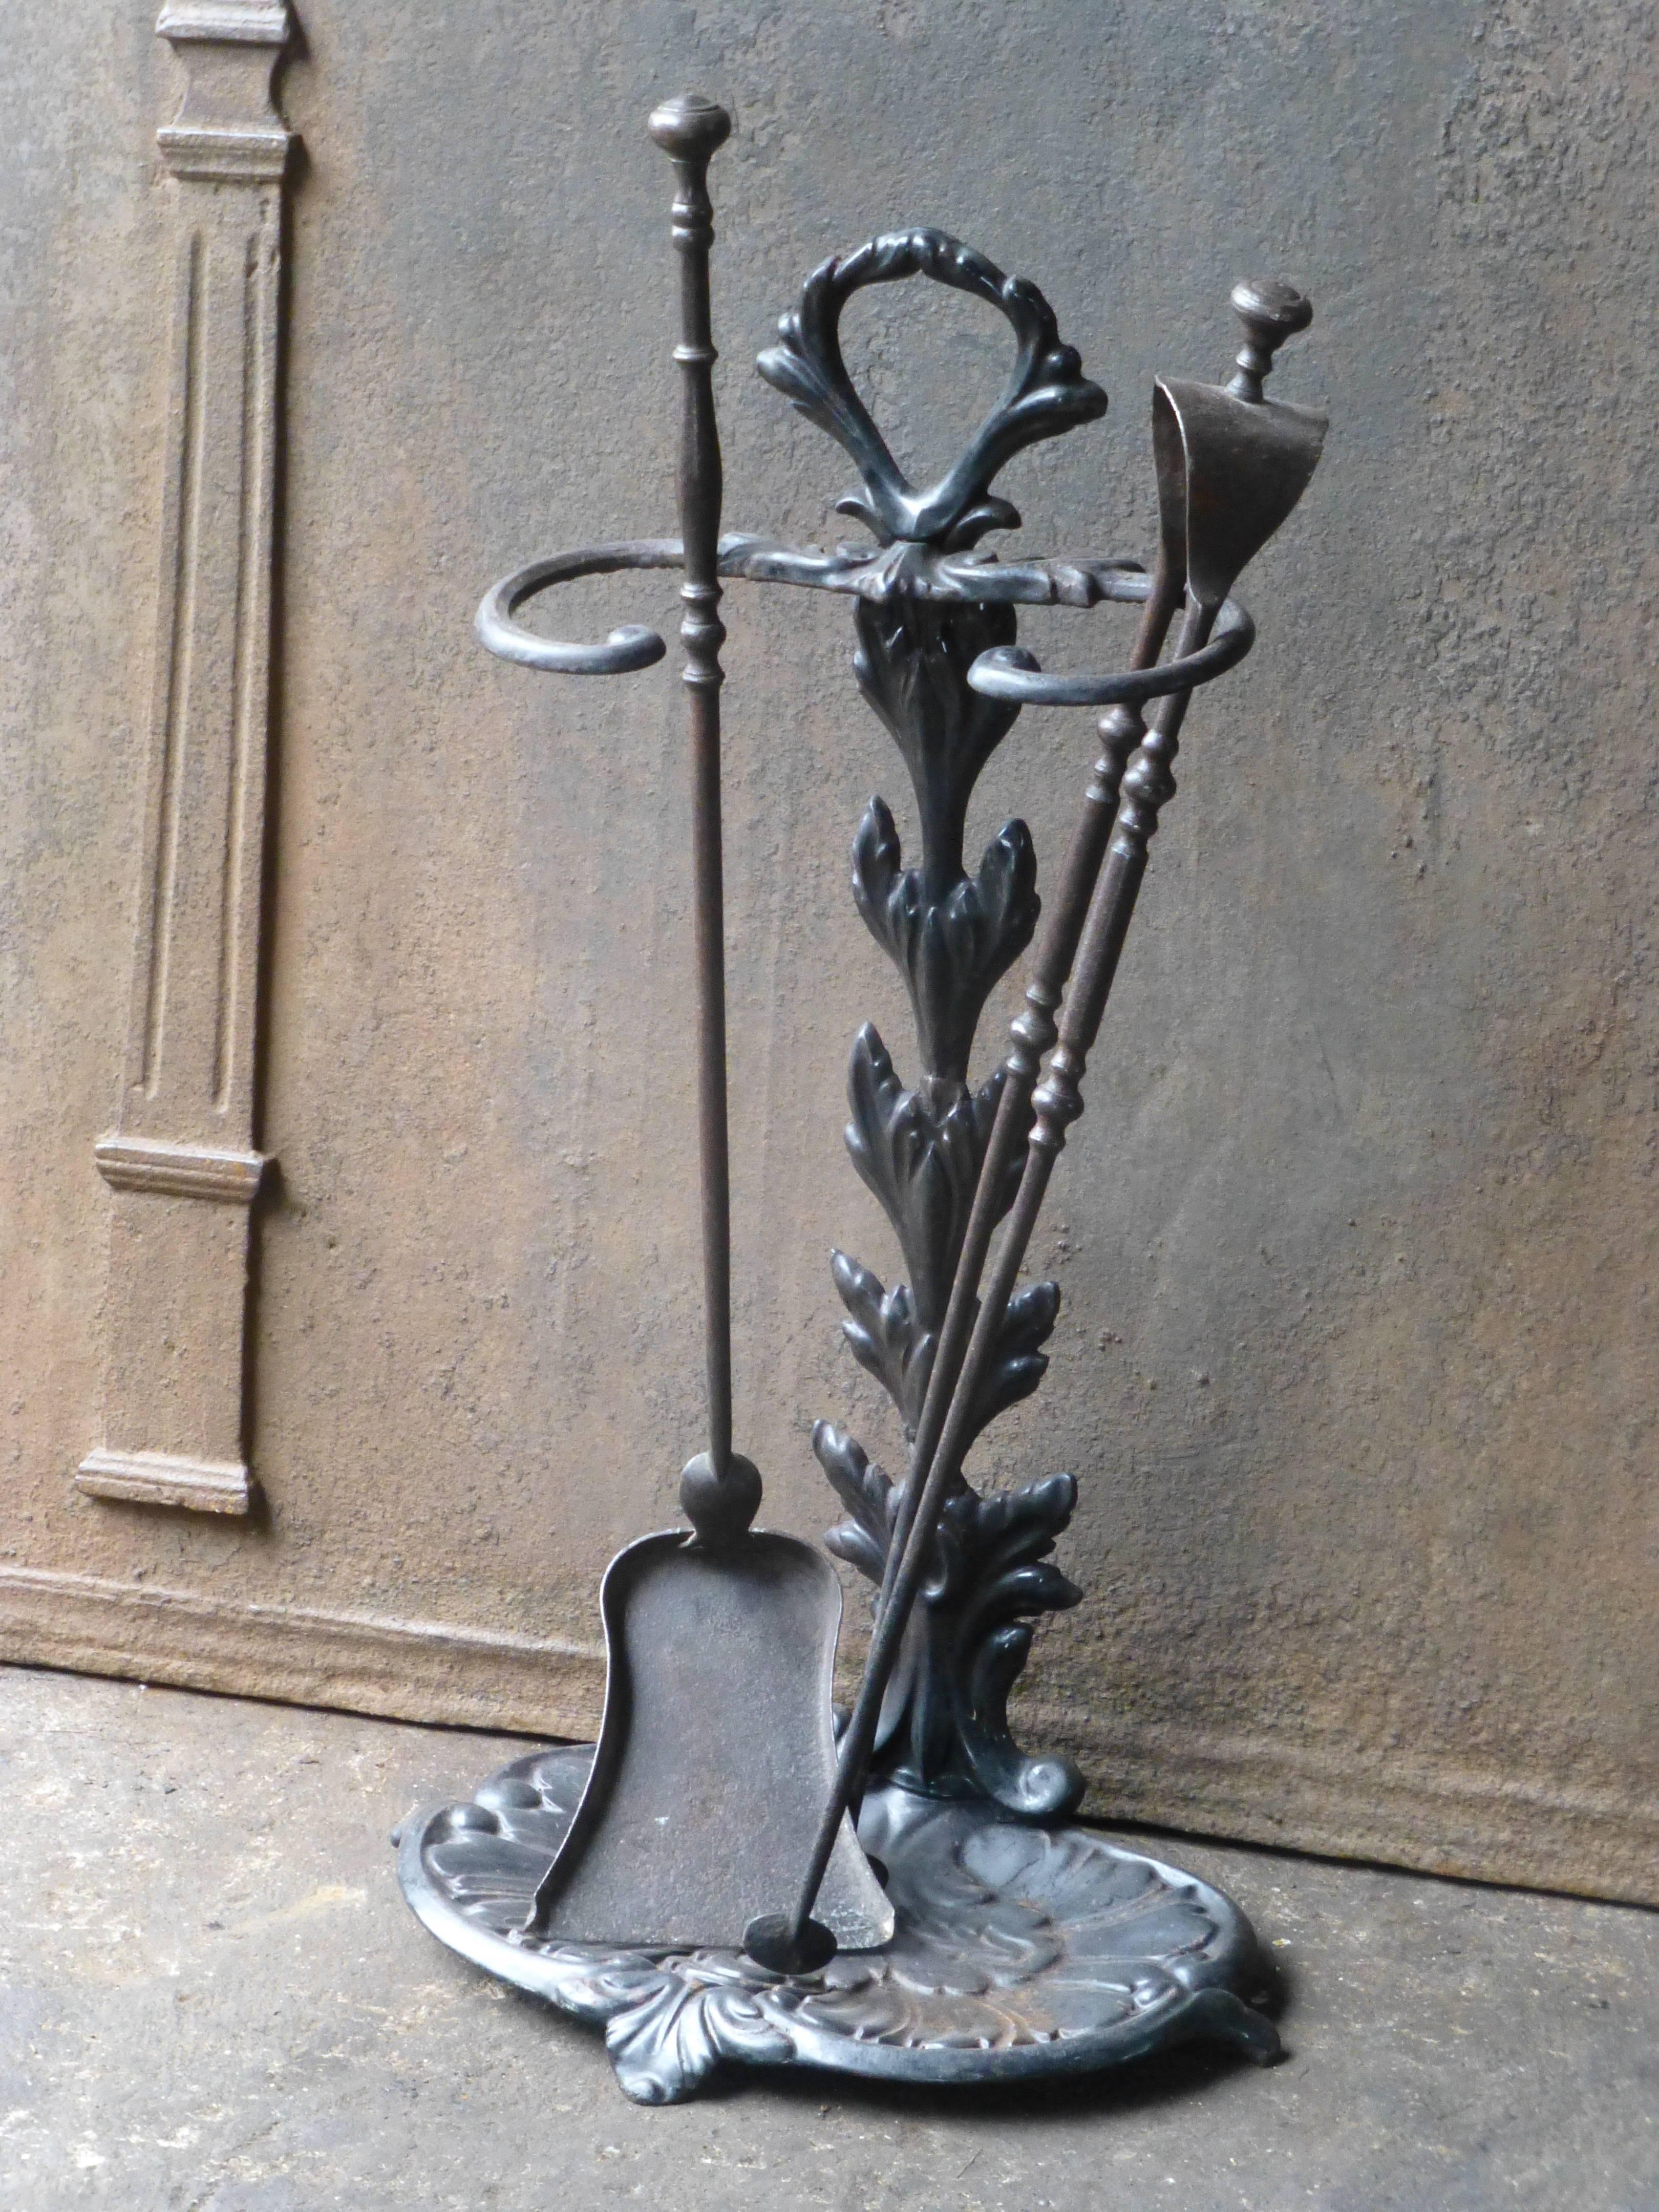 19th century French fire tools or fire irons made of wrought iron (tools) and cast iron (stand).